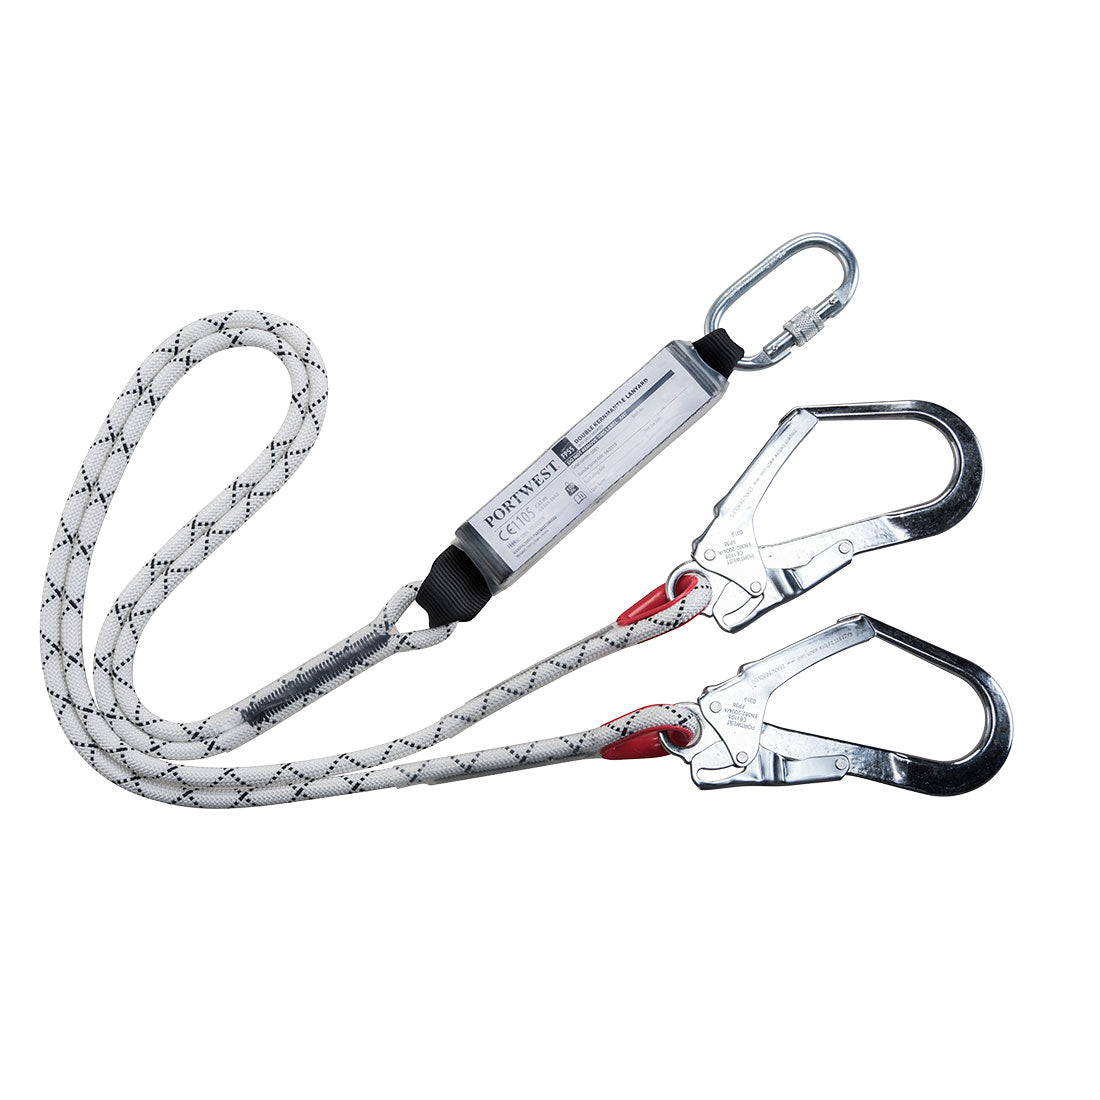 Double Kernmantle 1.8m Lanyard With Shock Absorber  (FP55)